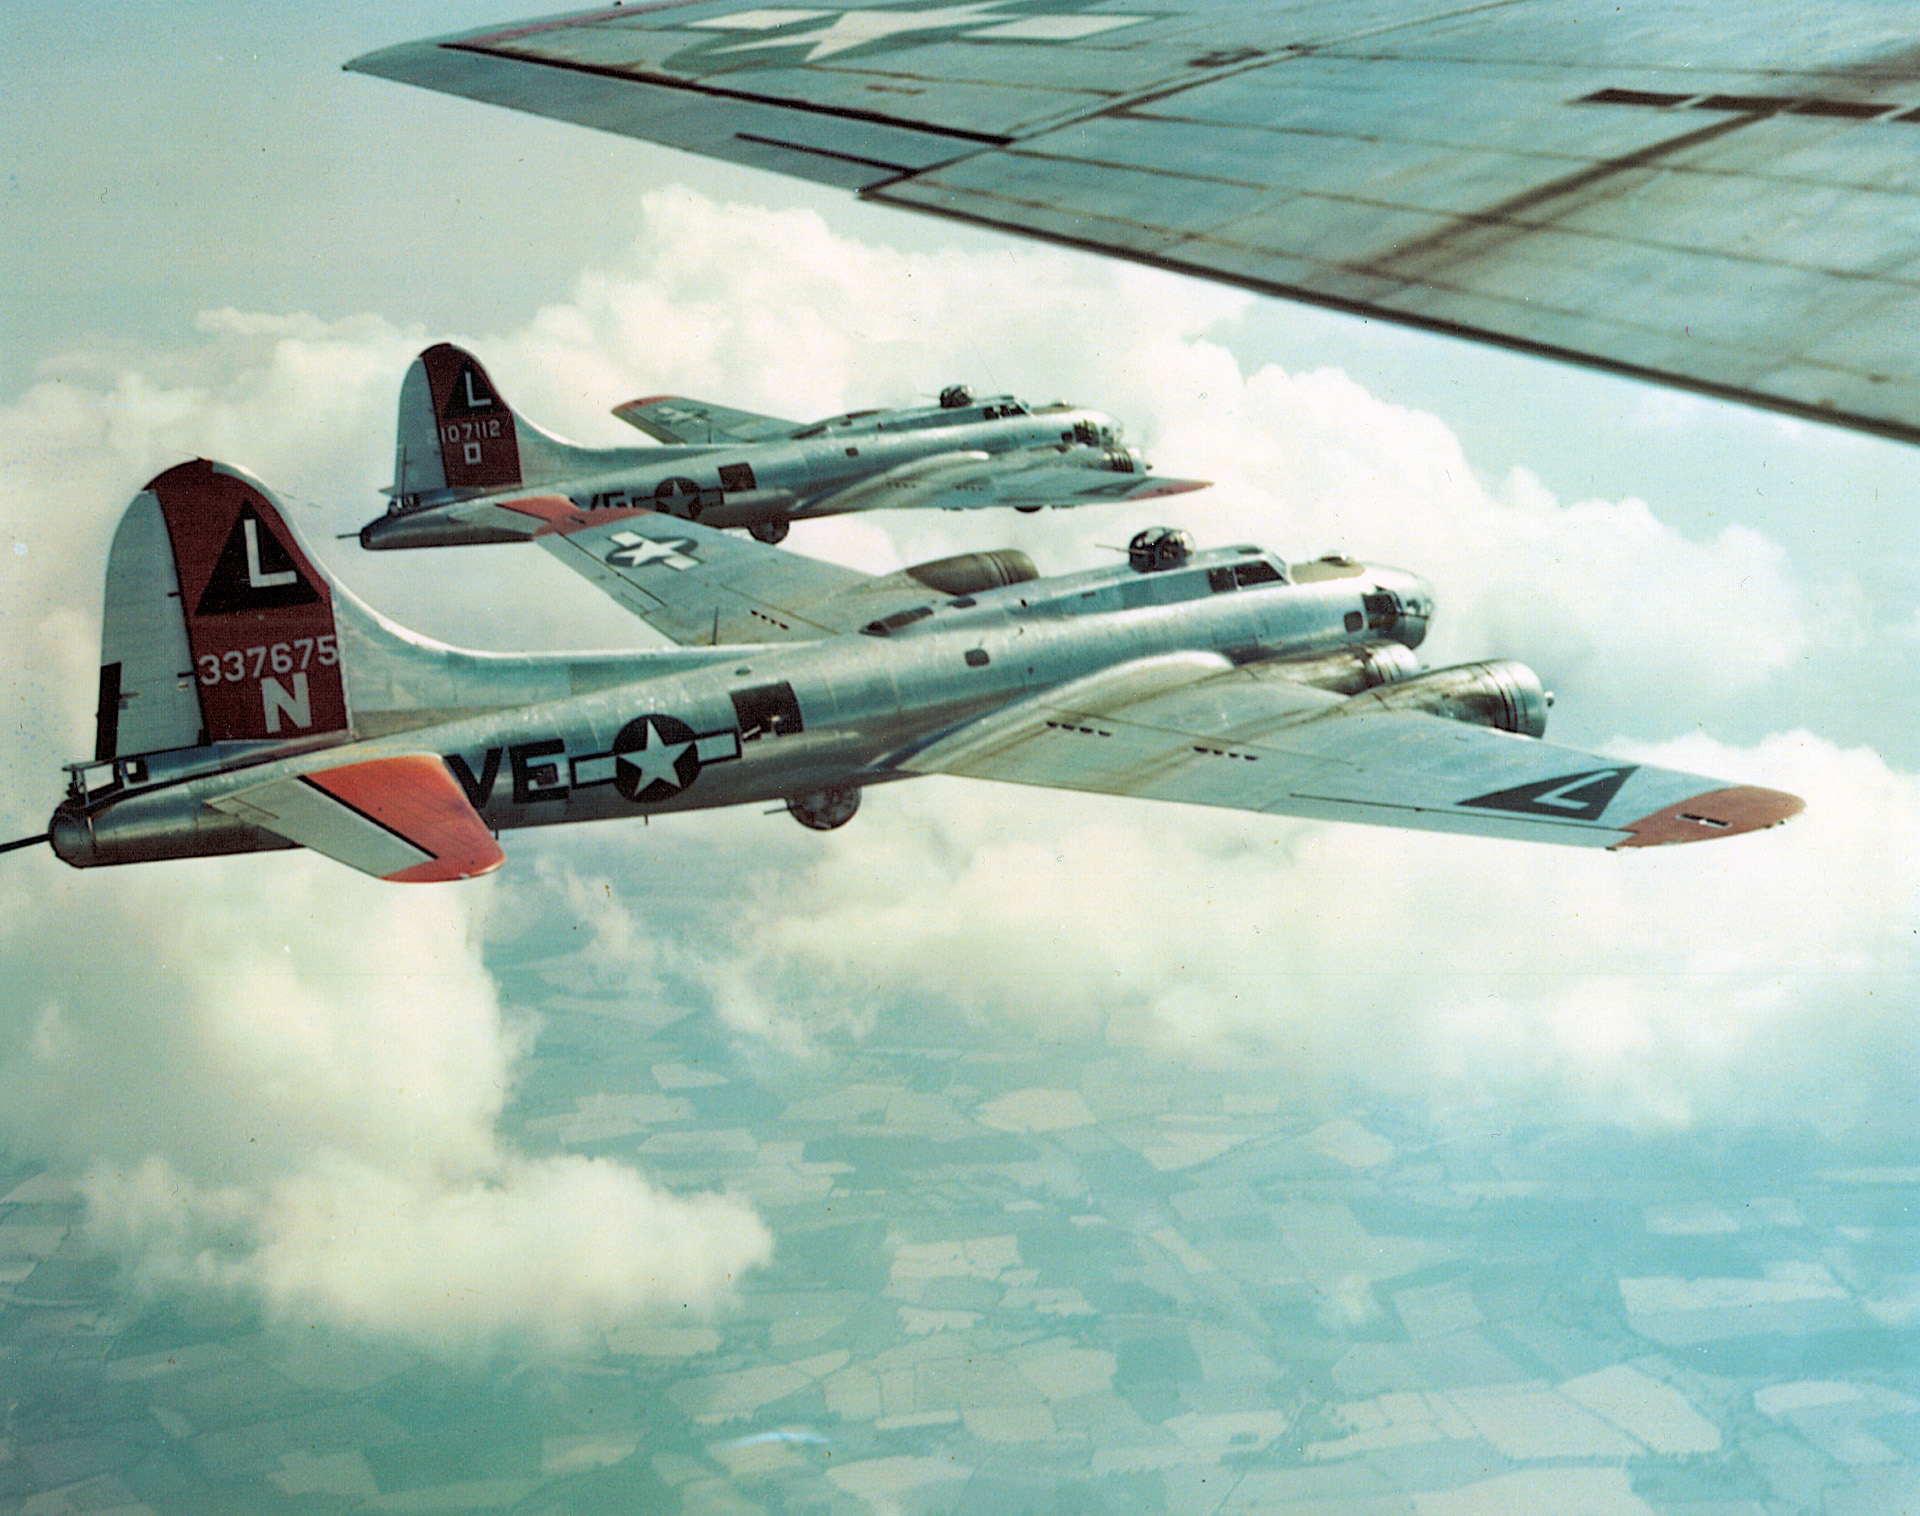 Counting on safety in numbers, B-17 crews practice flying in a box formation over England.